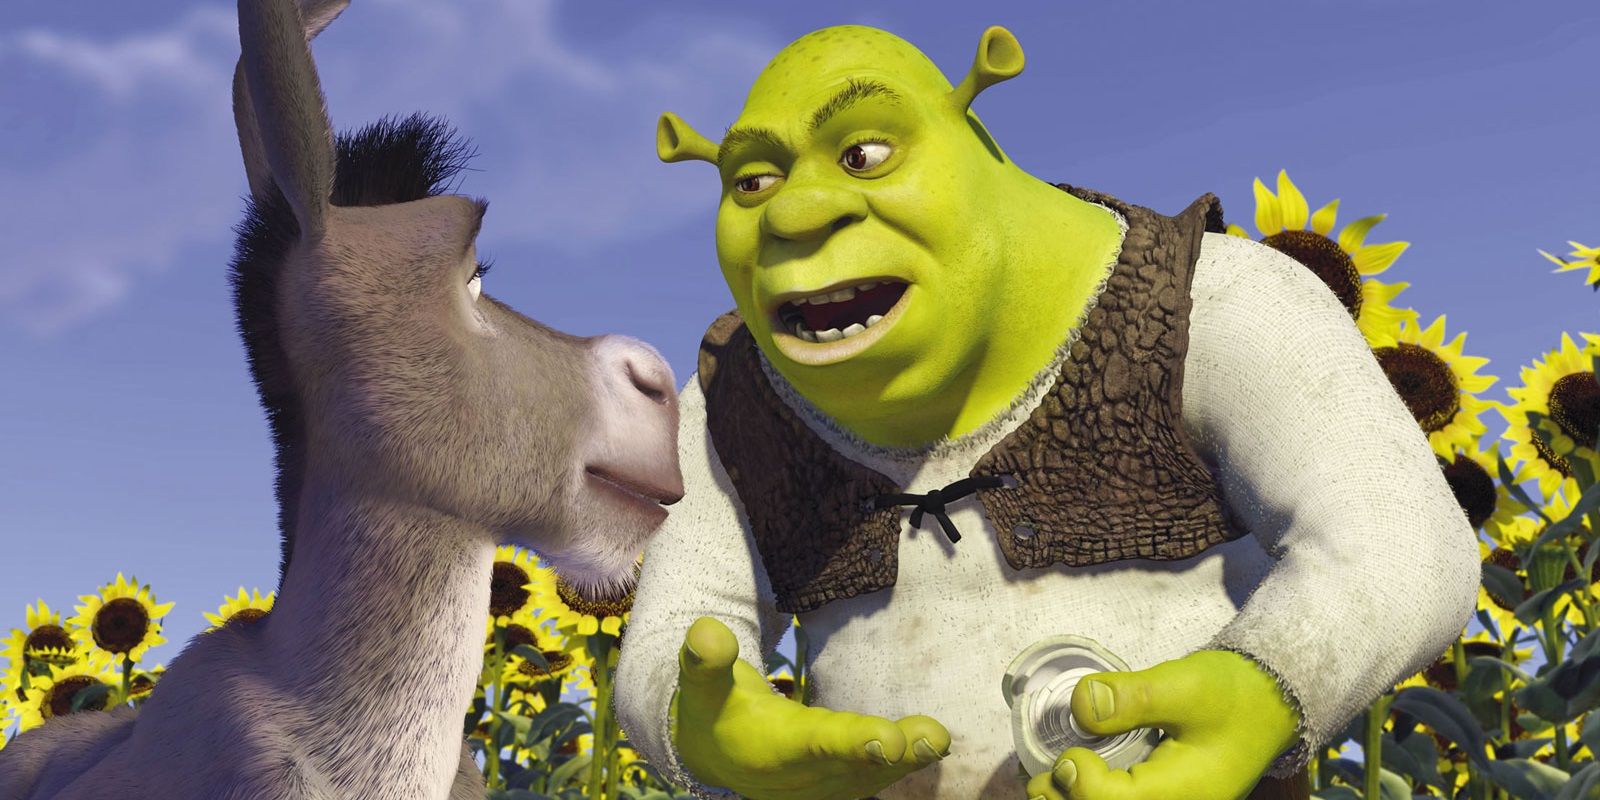 Shrek and Donkey standing by a sunflower field